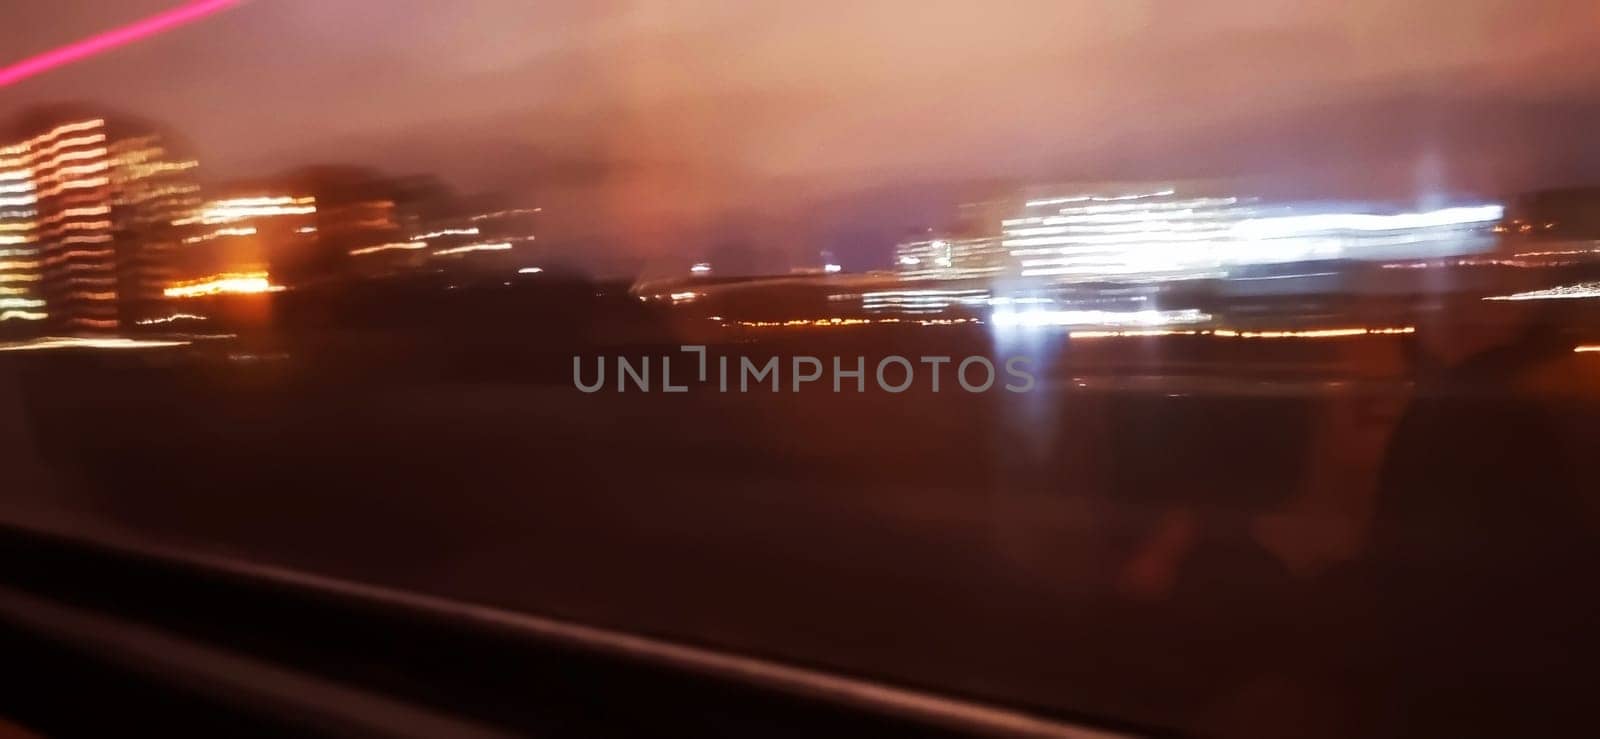 Conceptual shot of the light trails captured from the window of the moving train